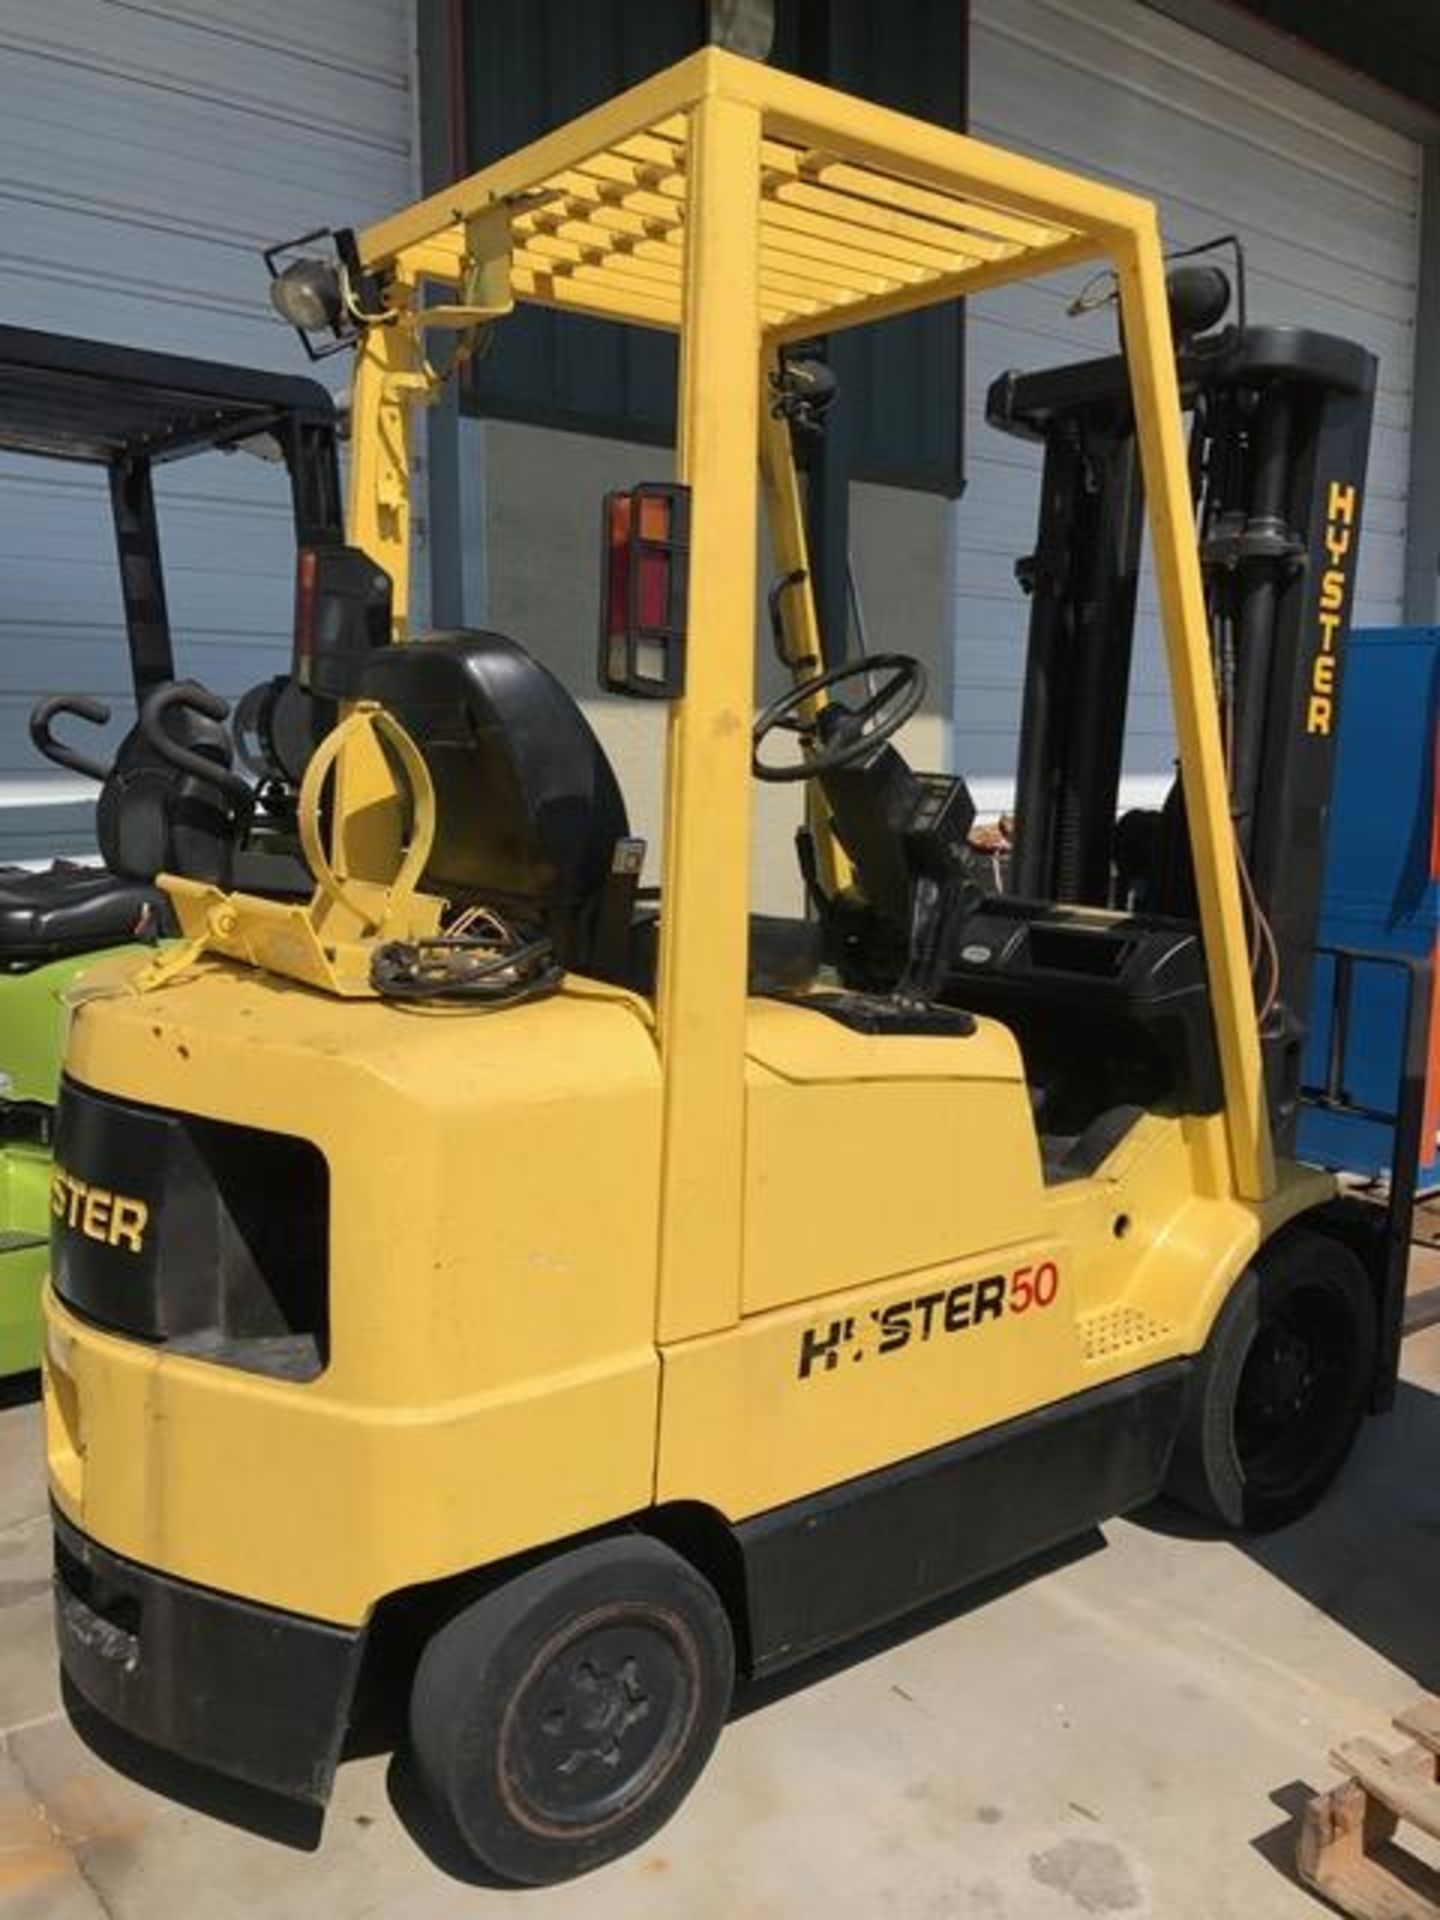 HYSTER LP GAS FORKLIFT MOD. S50XM, 2,900 LB LIFT CAP. 240" MAX HEIGHT - Image 3 of 7